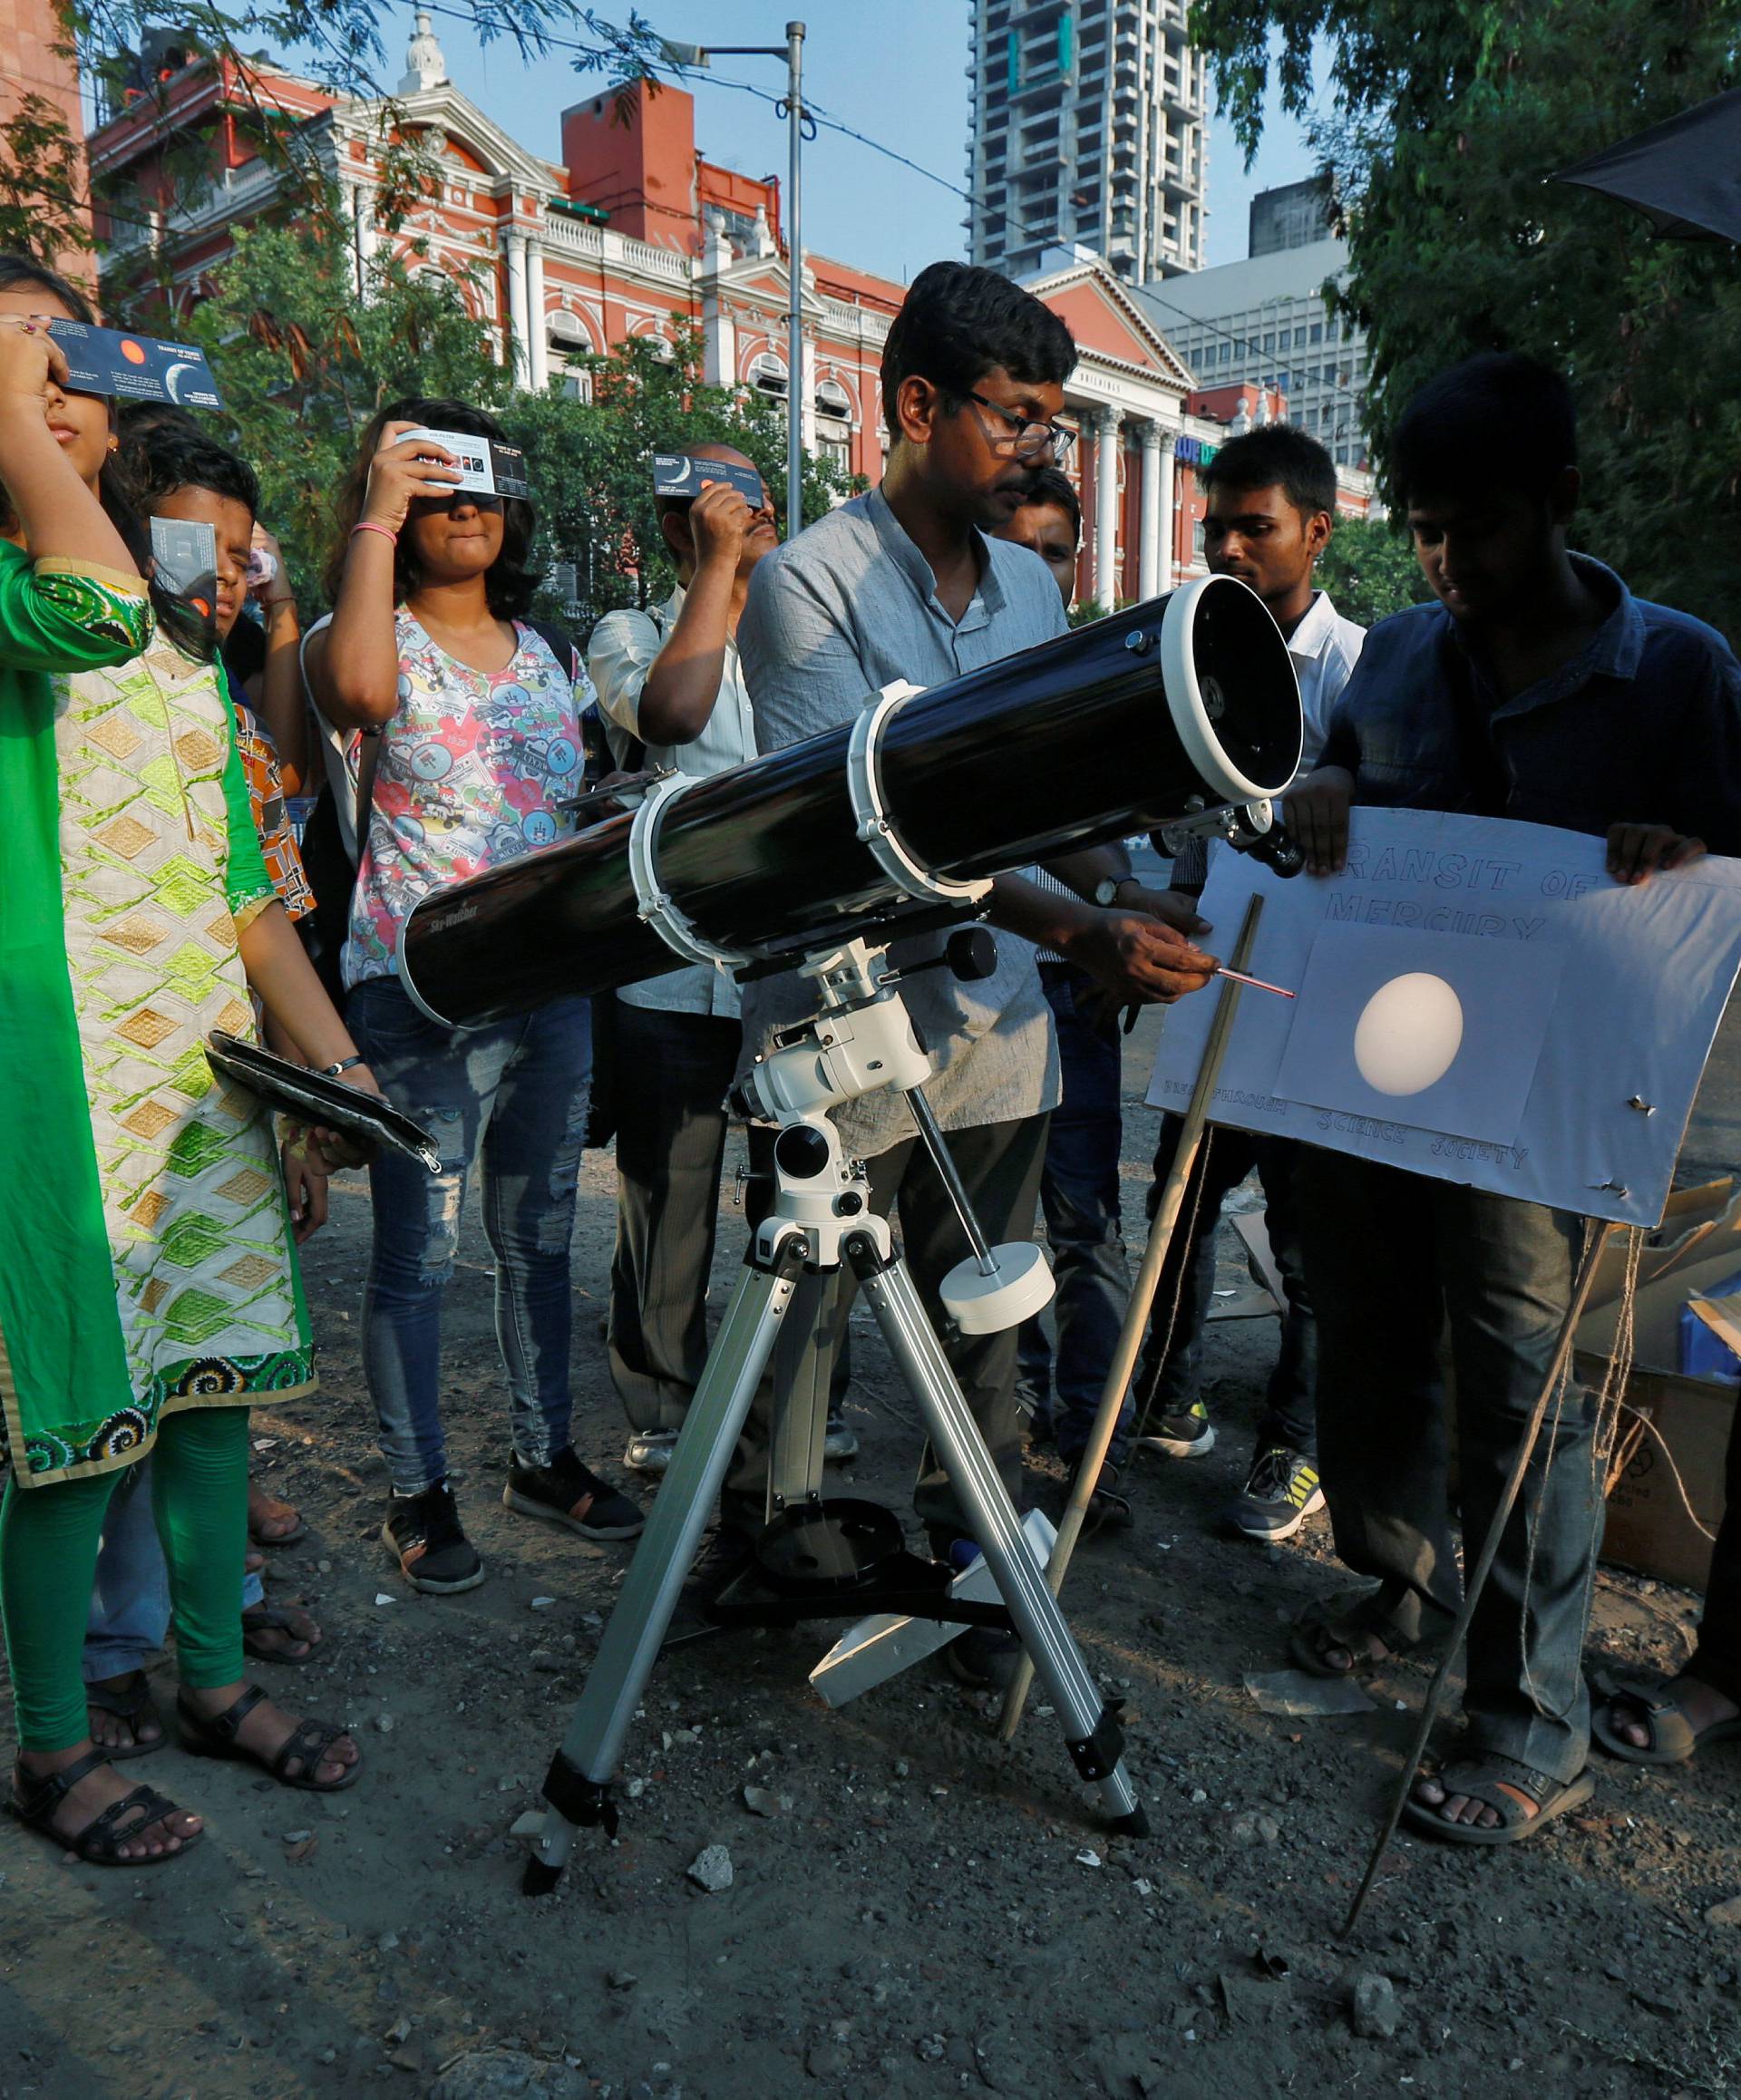 People look at planet Mercury transiting across the sun with solar filters at a public viewing in Kolkata